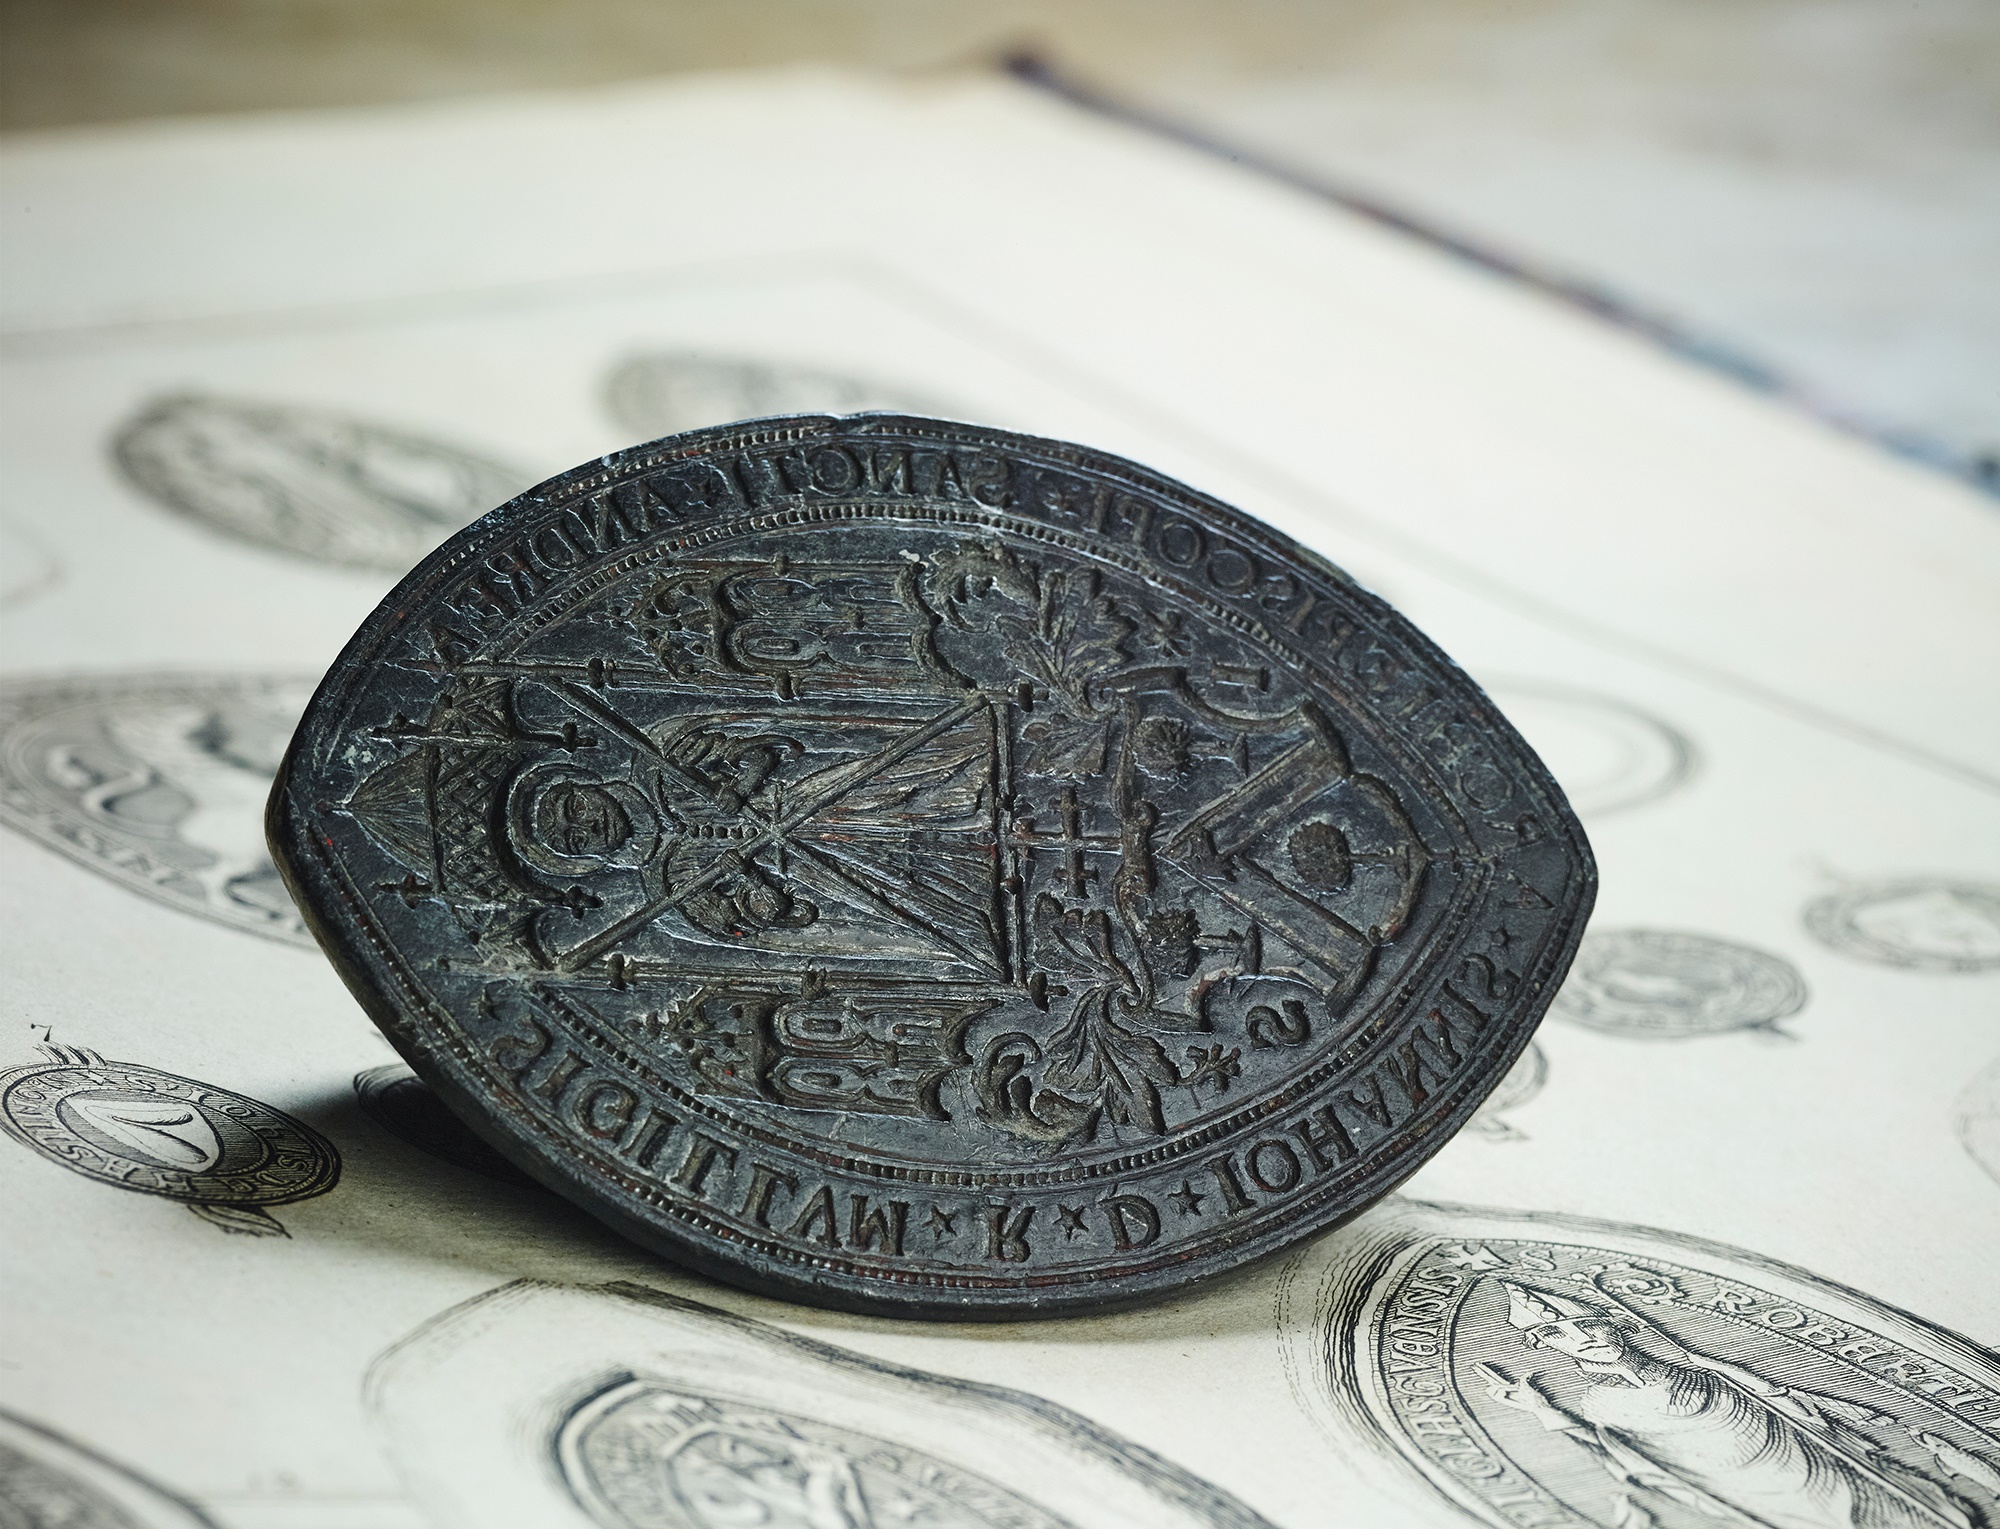 THE ARCHBISHOP SPOTTISWOODE (1565-1639) SEAL